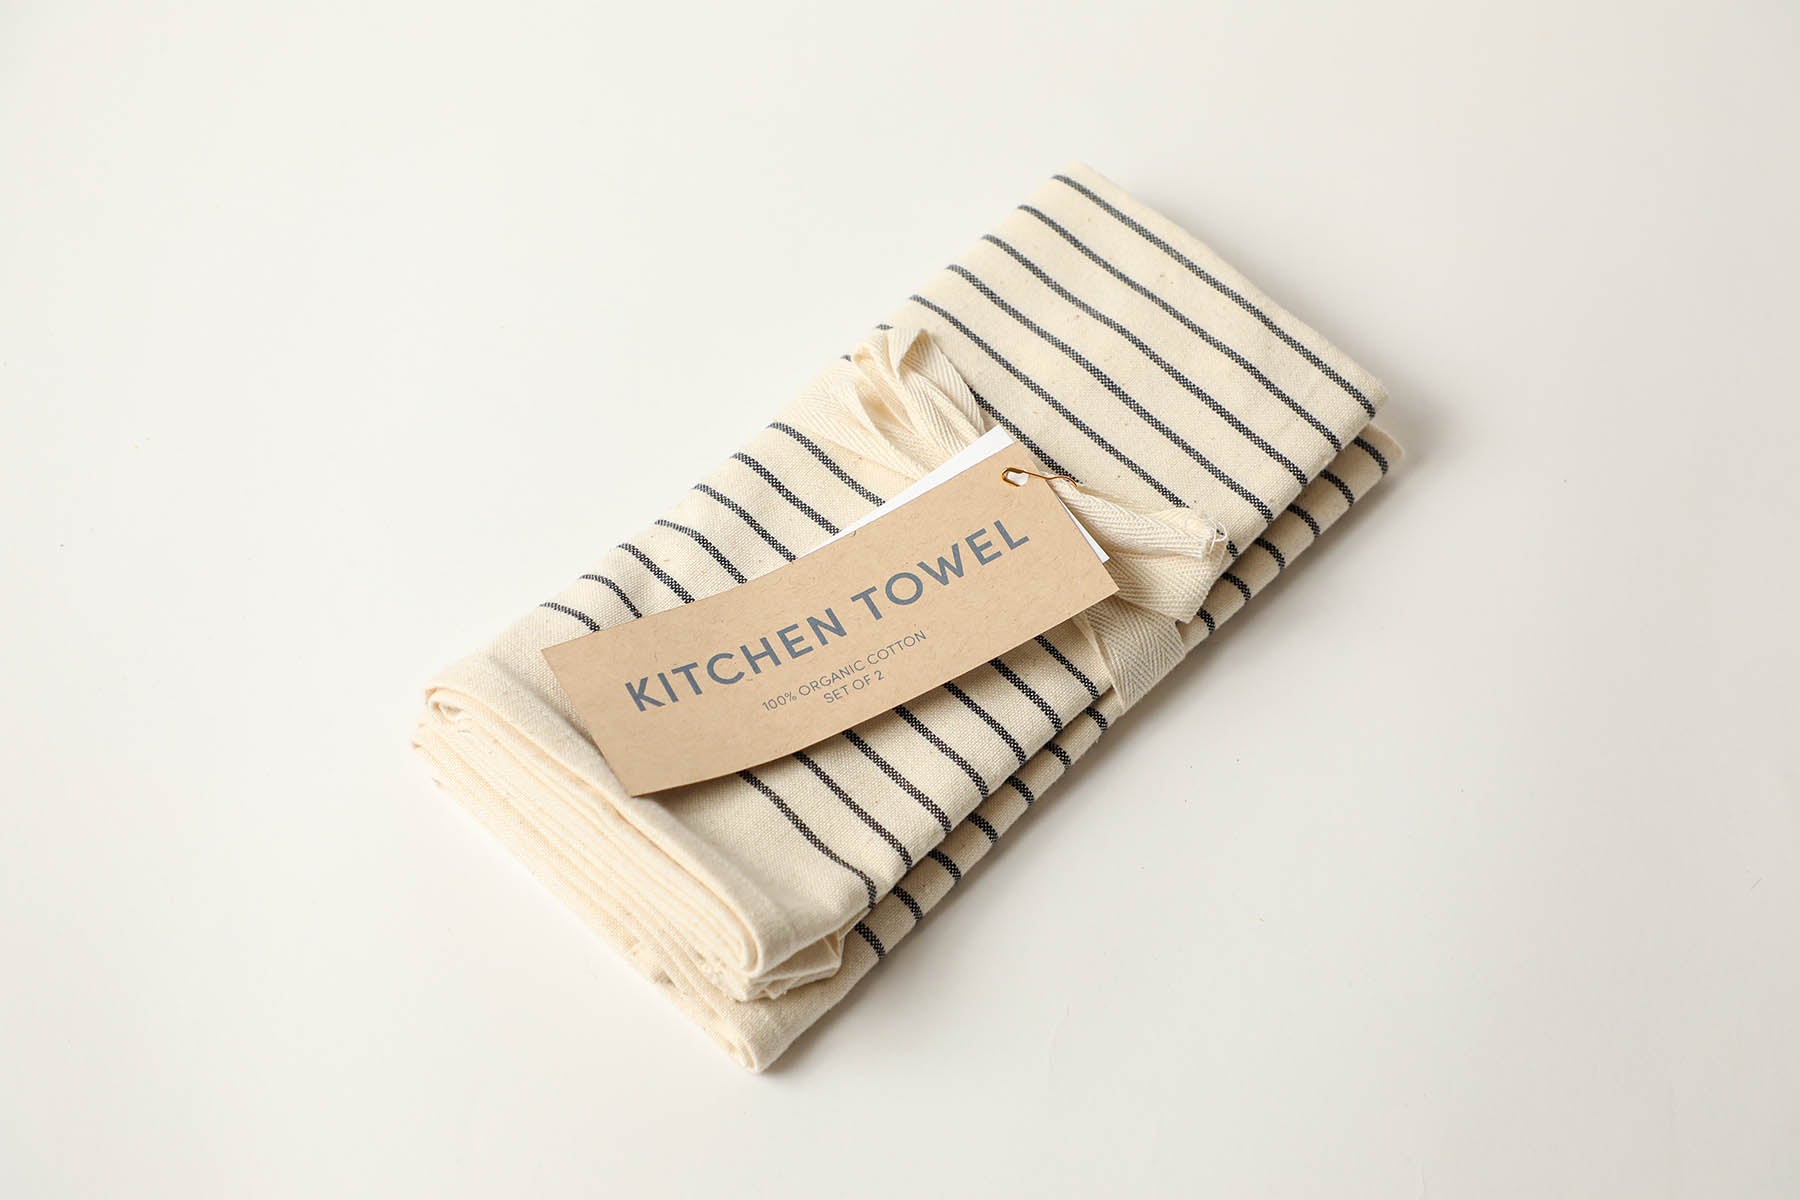 Kitchen Towels - Cream Stripe, Set of 2, Gives to World Central Kitchen